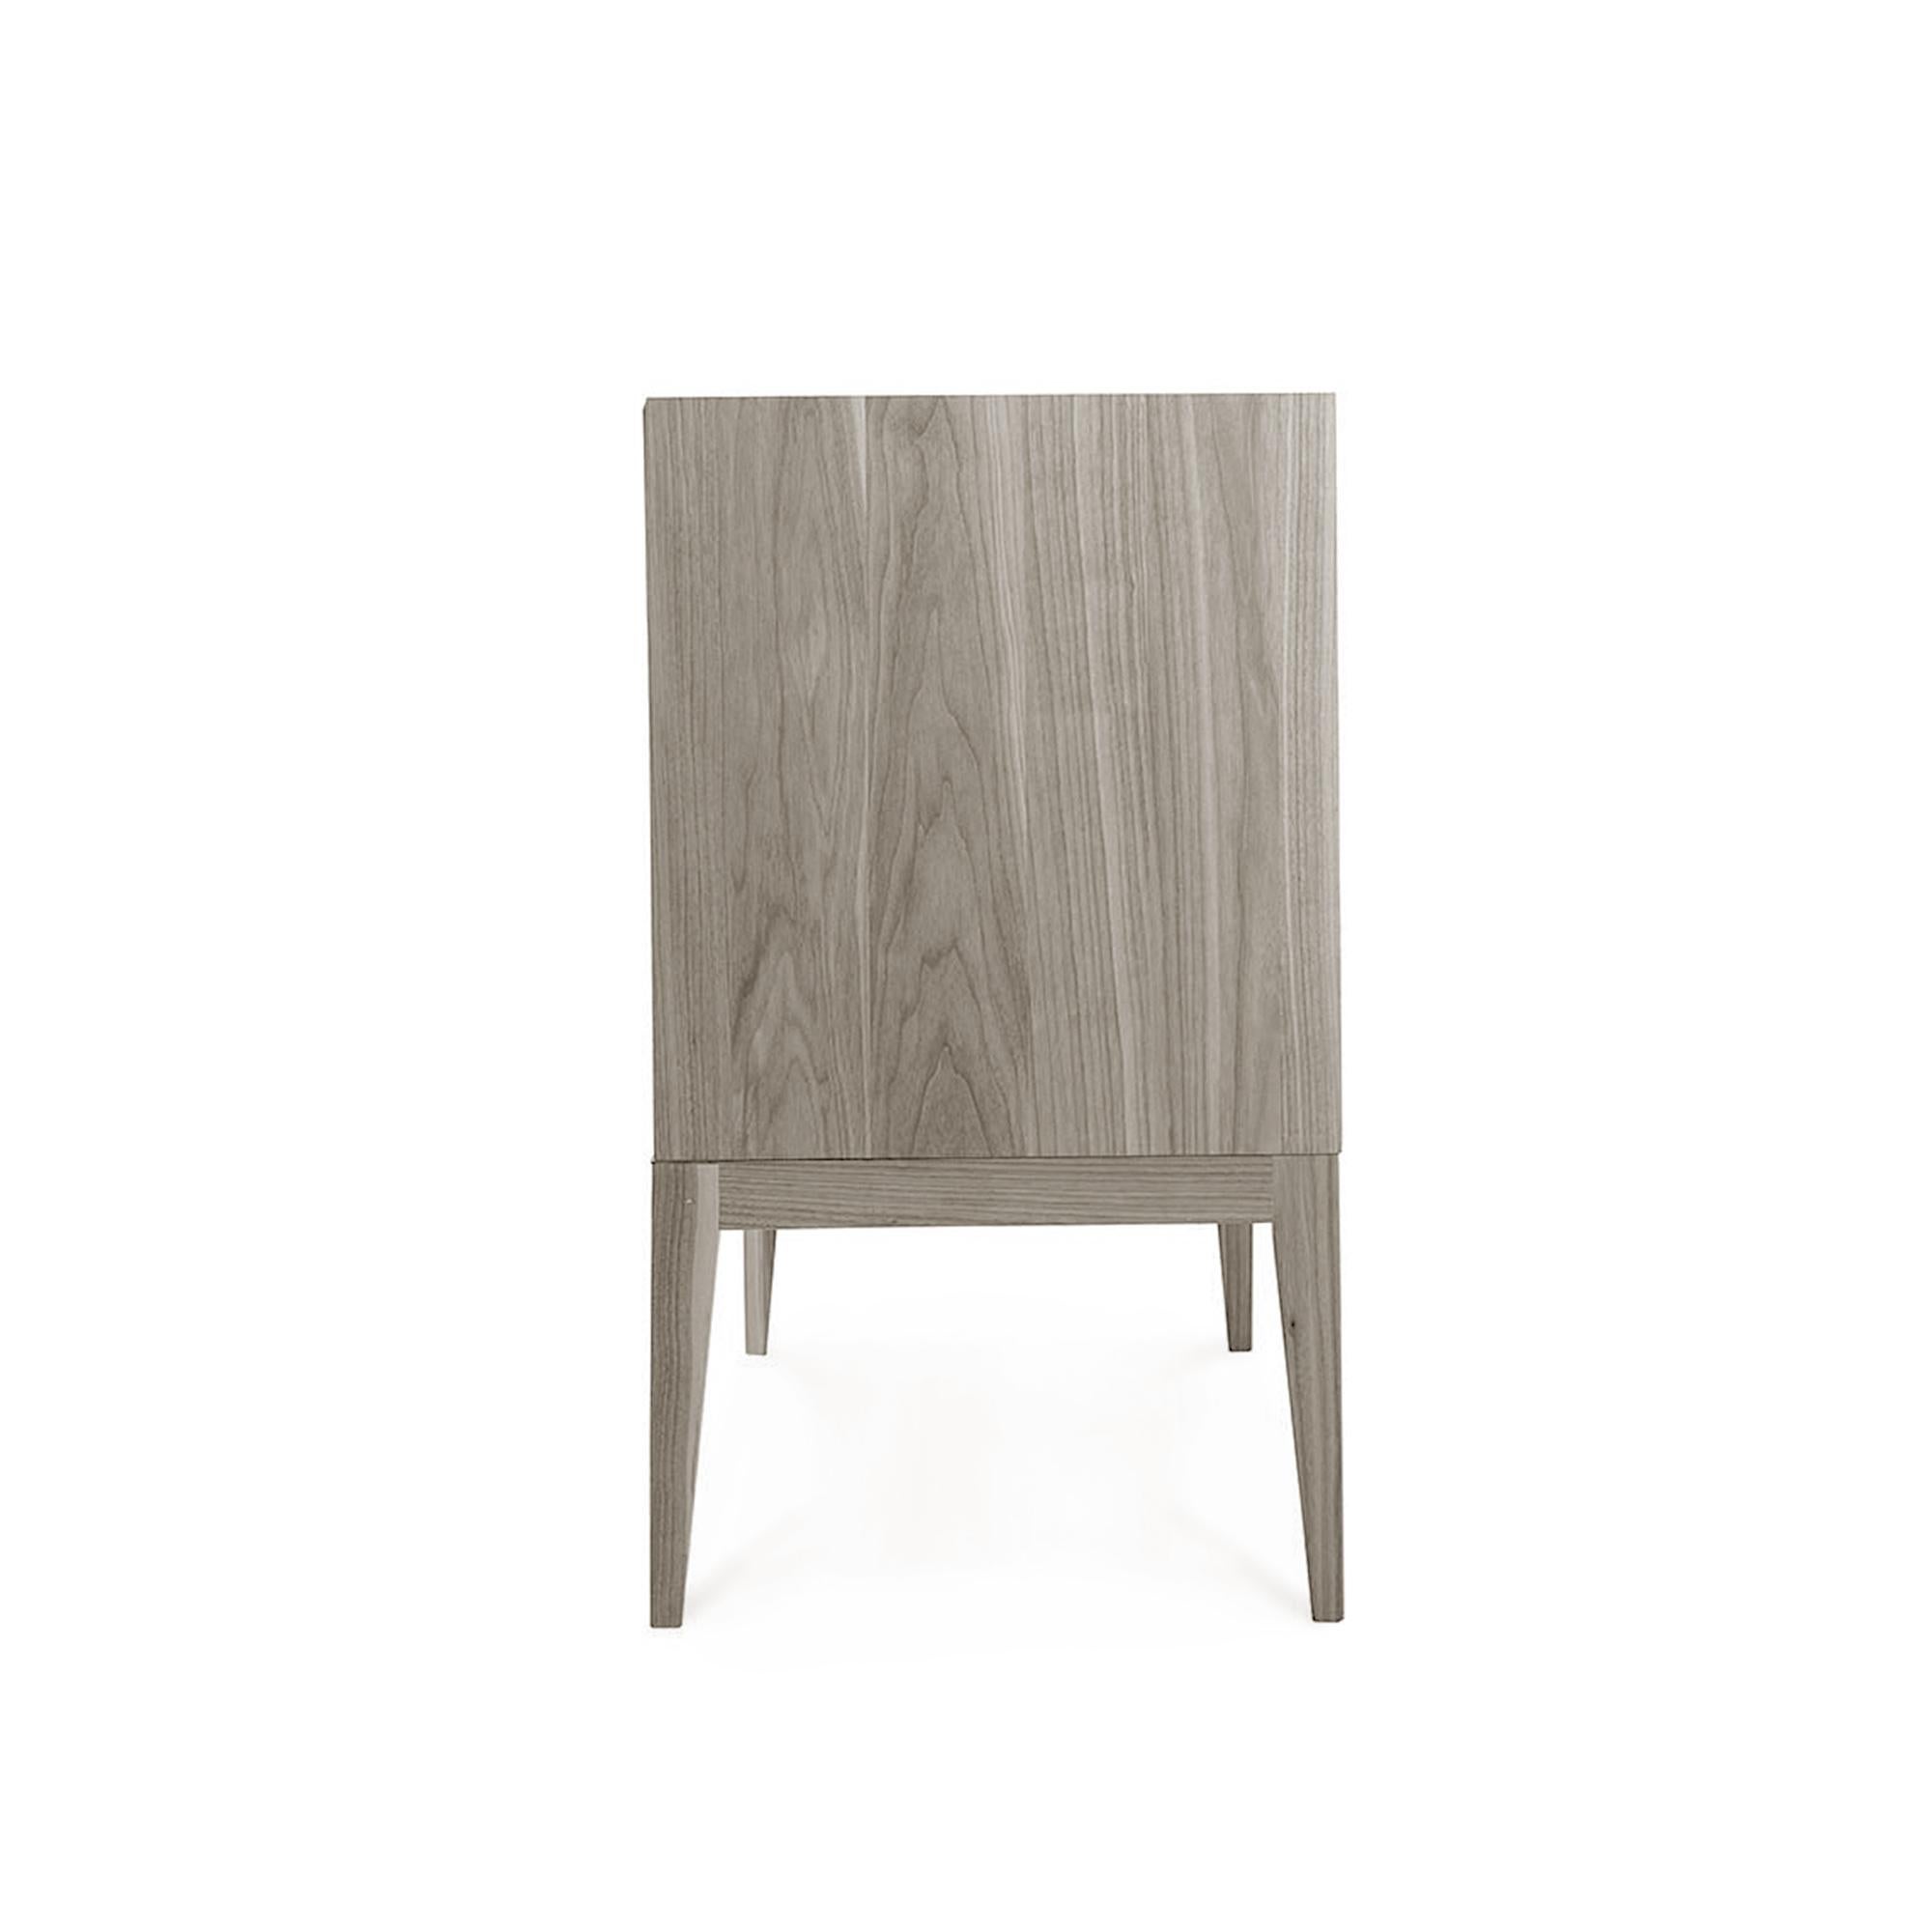 Modern Eleva Solid Wood Sideboard, Walnut in Natural Grey Finish, Contemporary For Sale